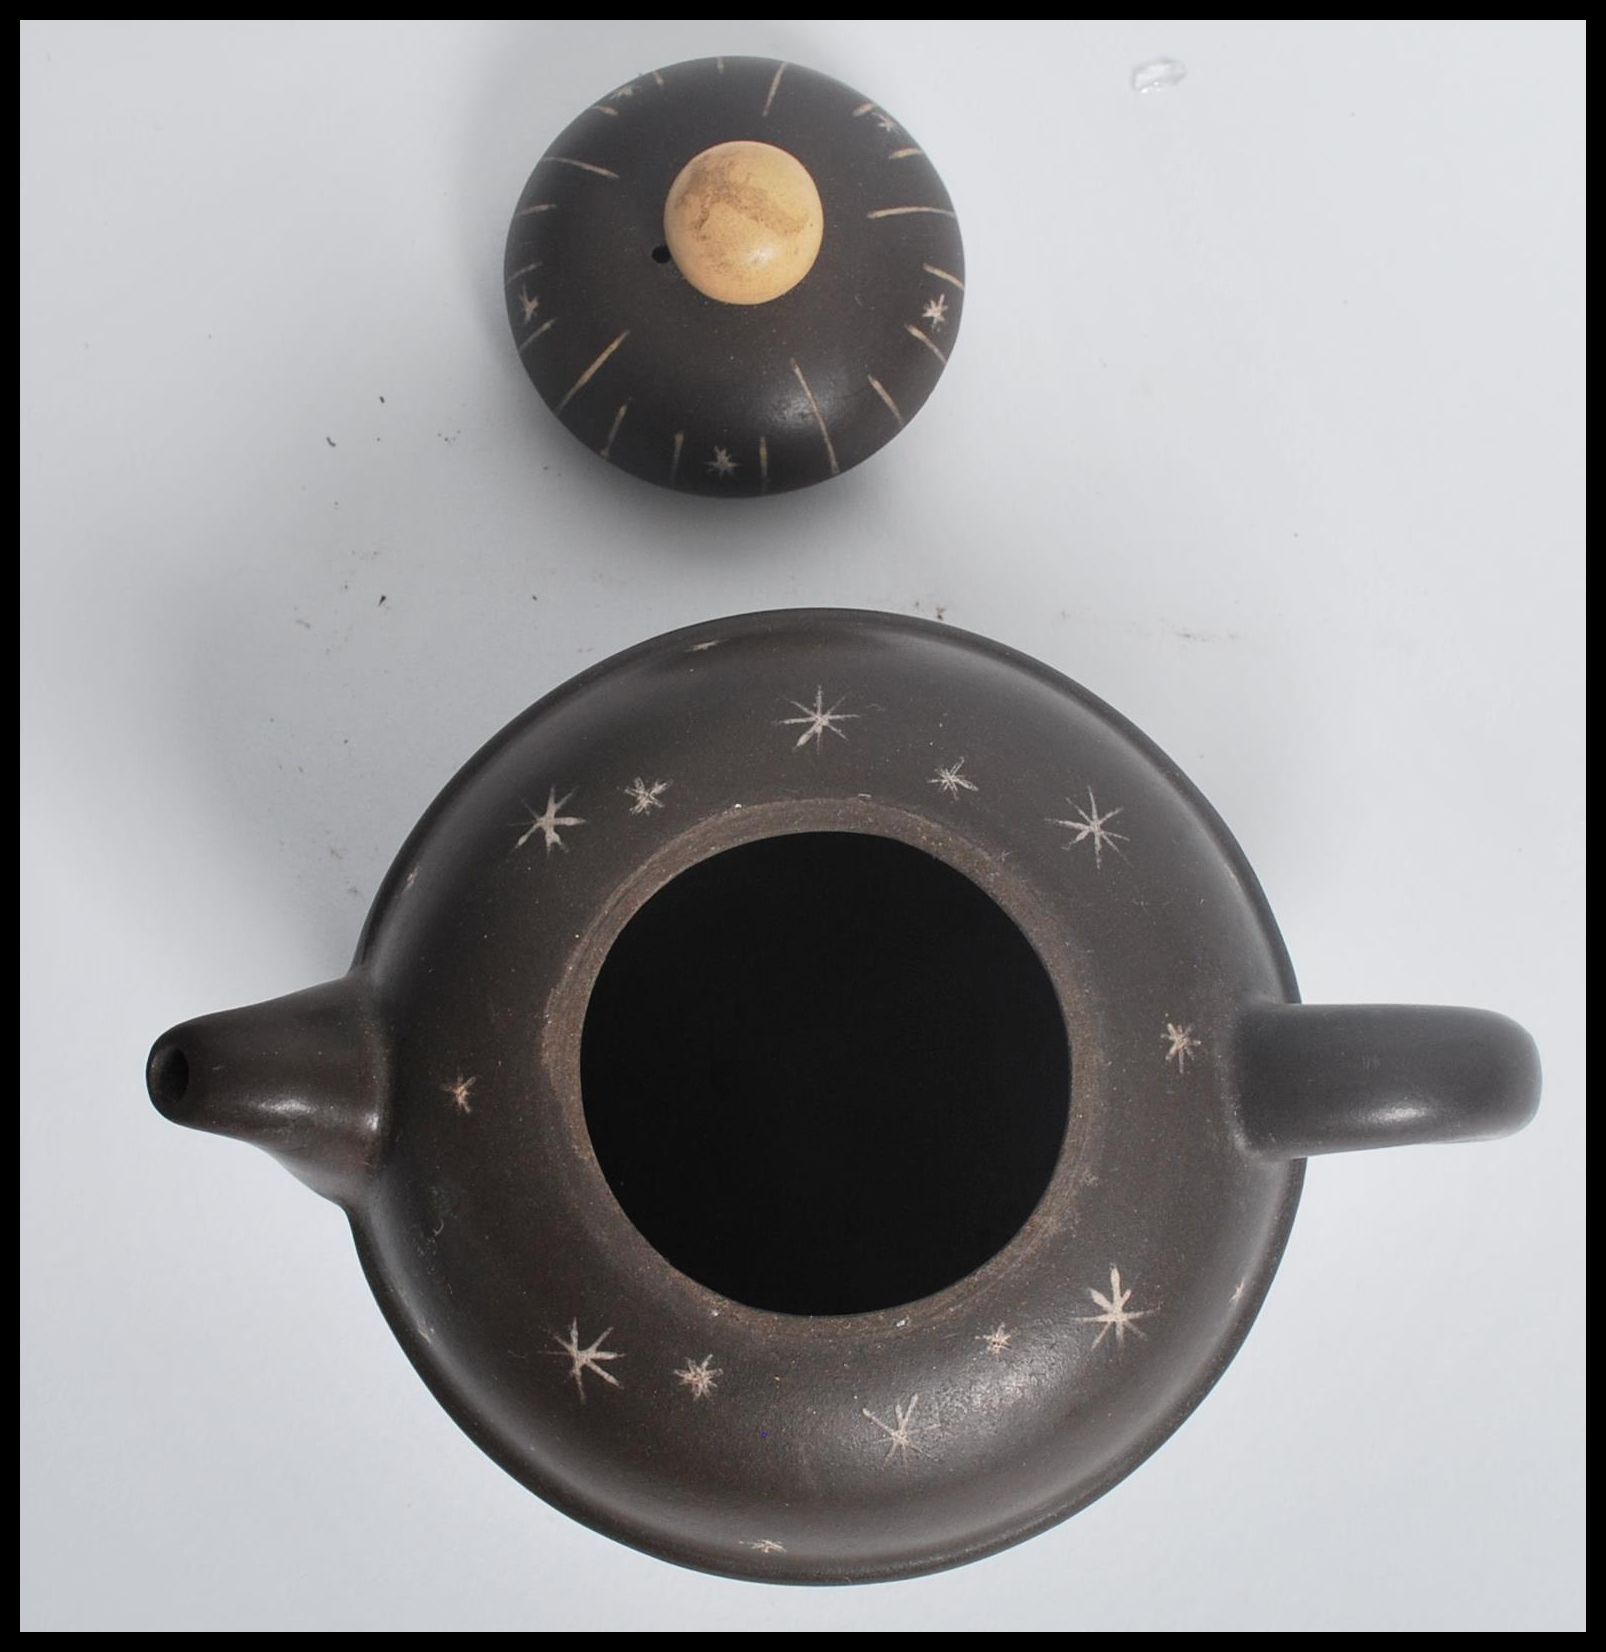 A Chinese Yi Zing terracotta teapot having a ball finial lid with star decoration and character - Image 6 of 7